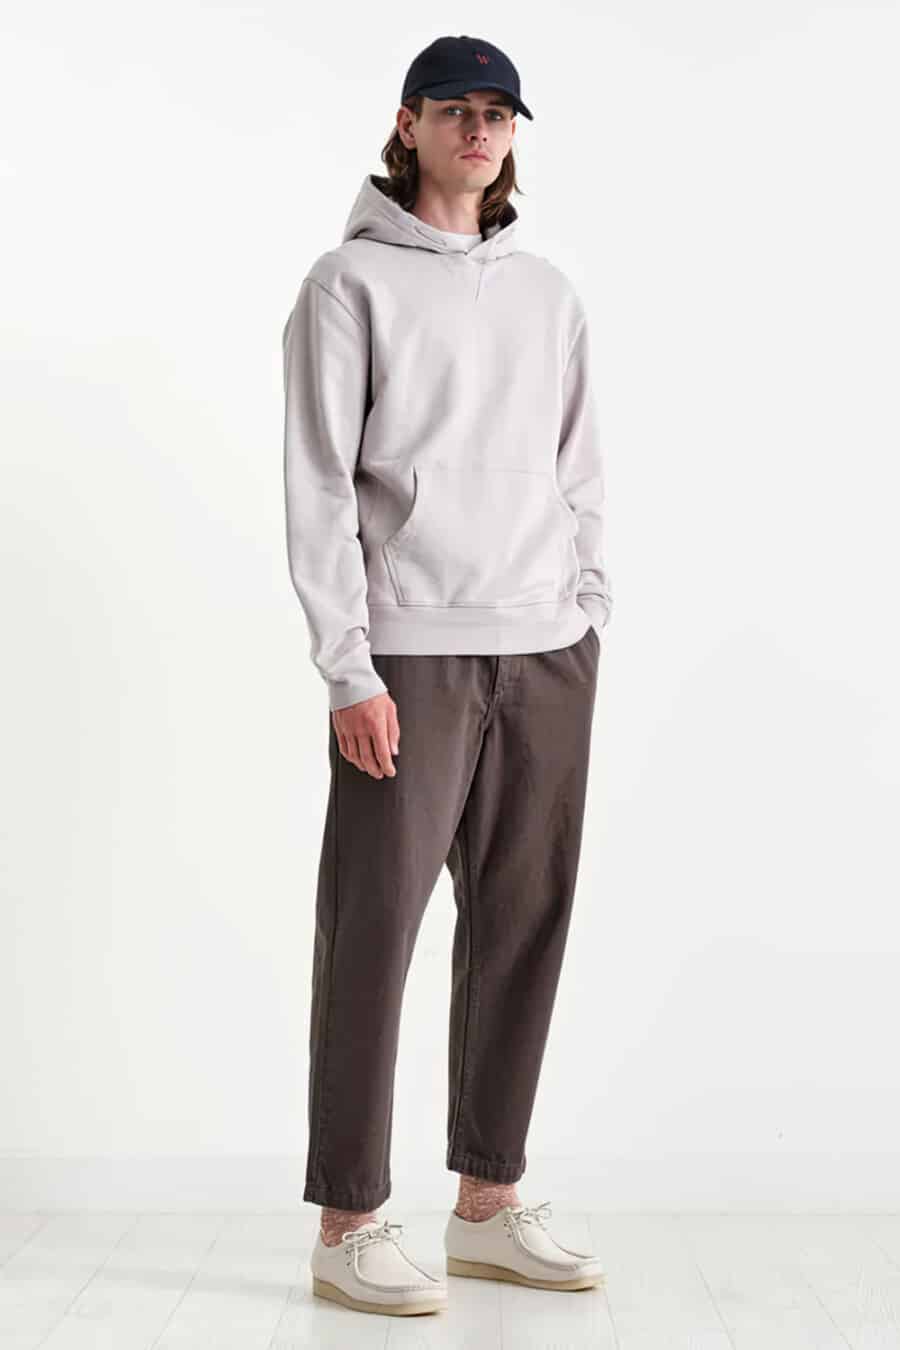 Men's dark brown pants, white Wallabee shoes, grey hoodie and navy baseball cap outfit